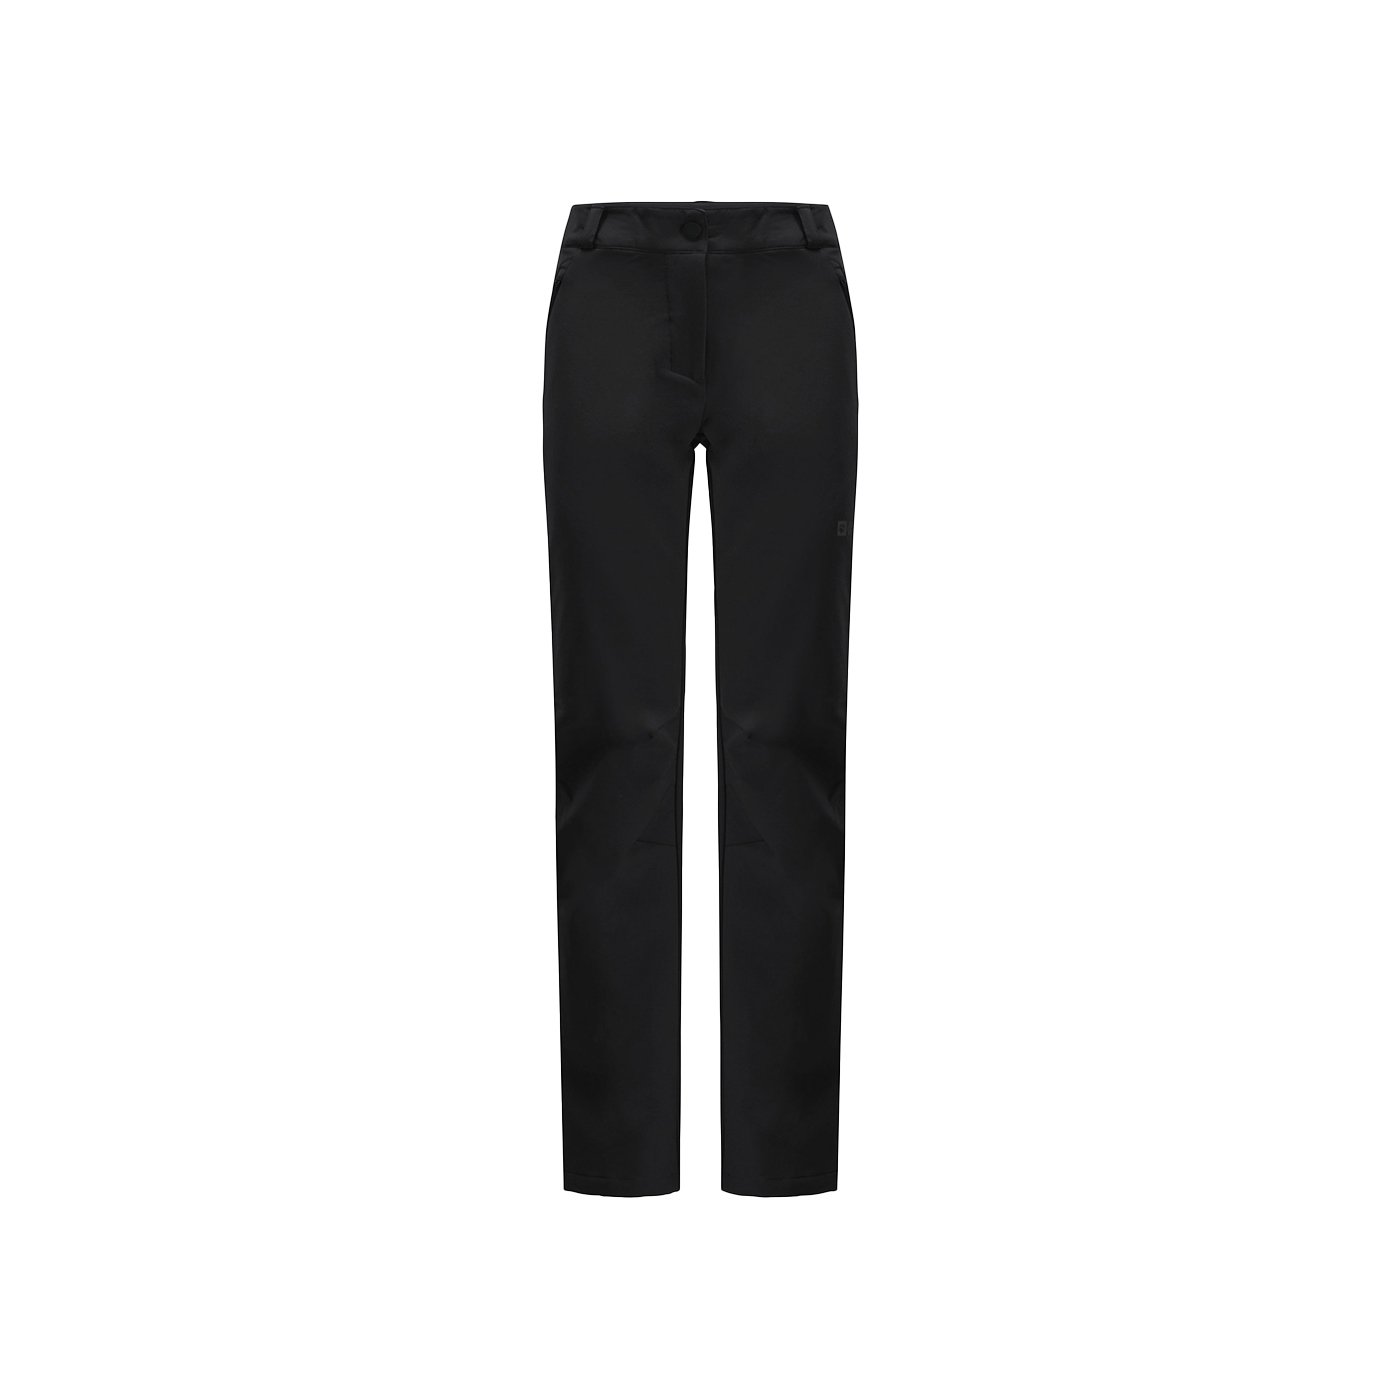 ACTIVATE THERMIC PANTS W - Siyah - 1